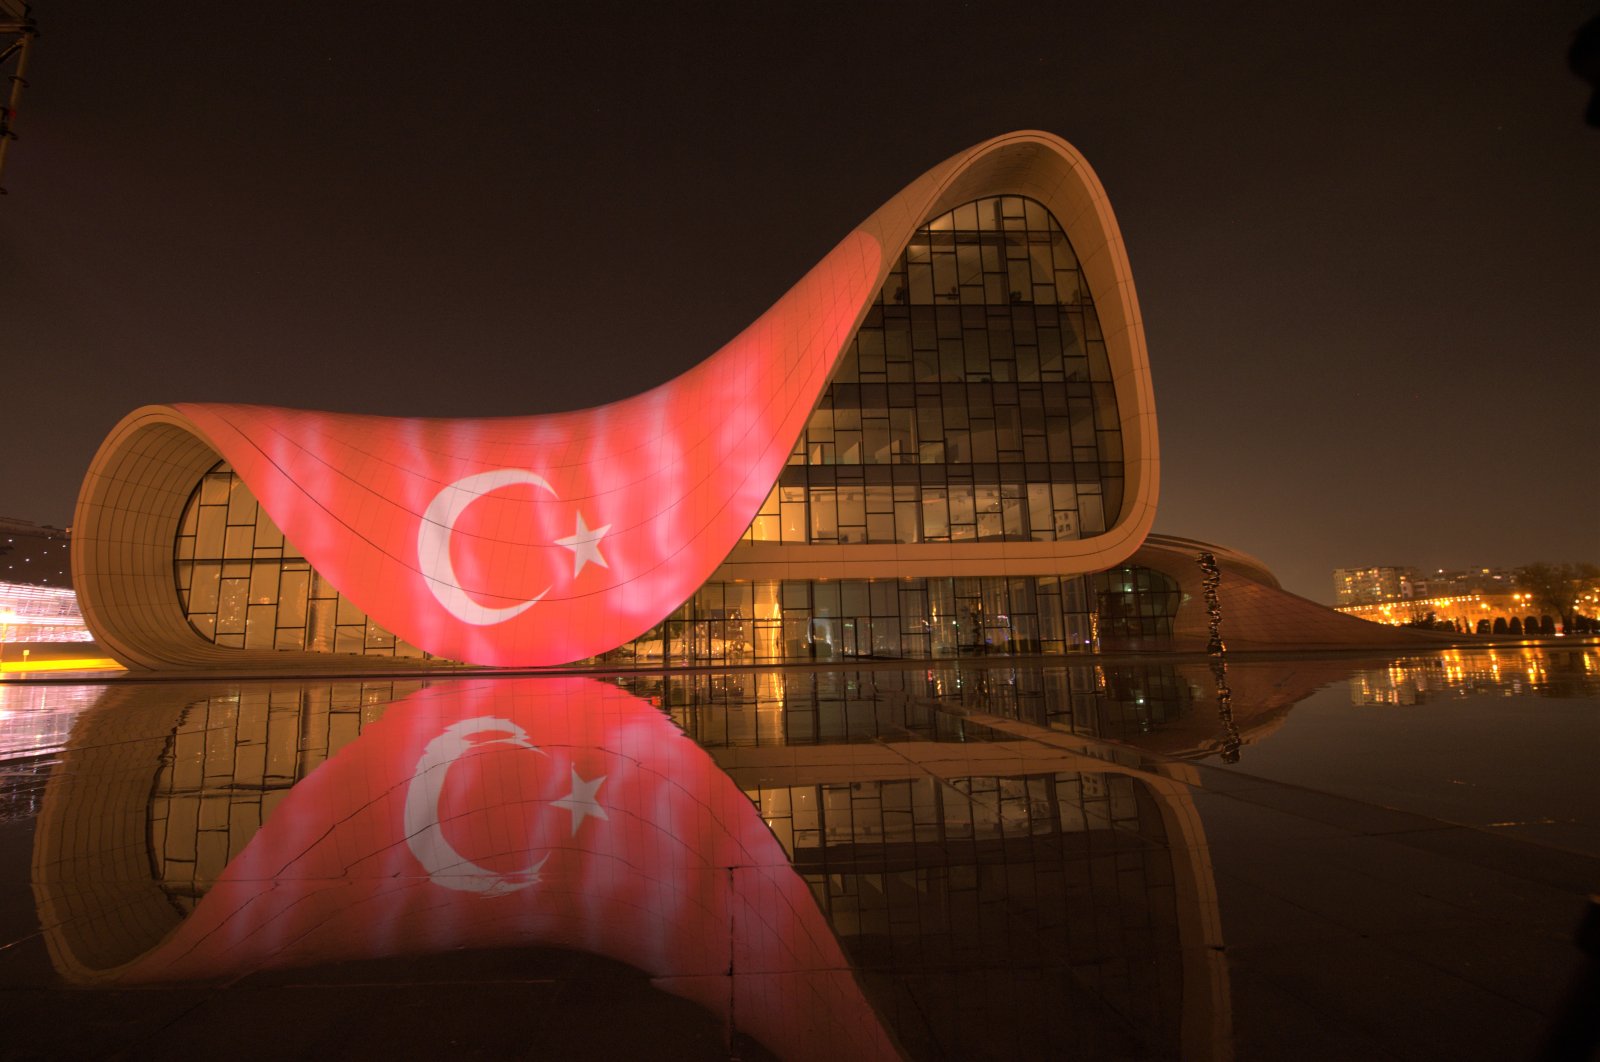 Azerbaijan displayed a digital version of the Turkish flag at the Heydar Aliyev Cultural Center, an iconic symbol in the capital Baku, in a show of solidarity amid the coronavirus pandemic, April 11, 2020. (AA Photo)
